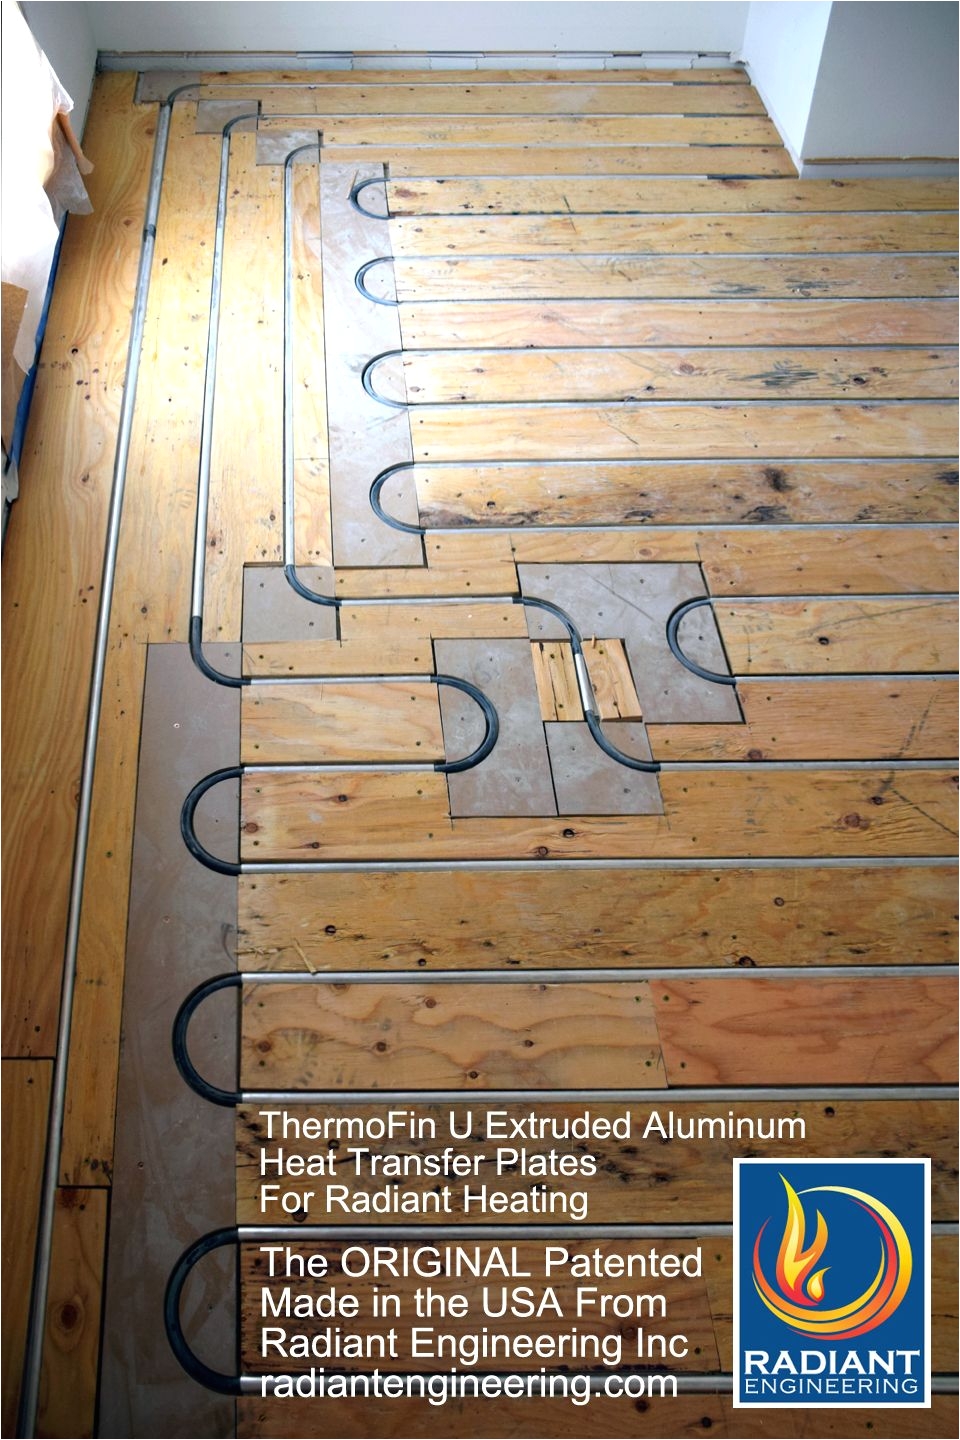 thermofin u extruded aluminum heat transfer plates are the original radiant heating products made in the usa by radiant engineering